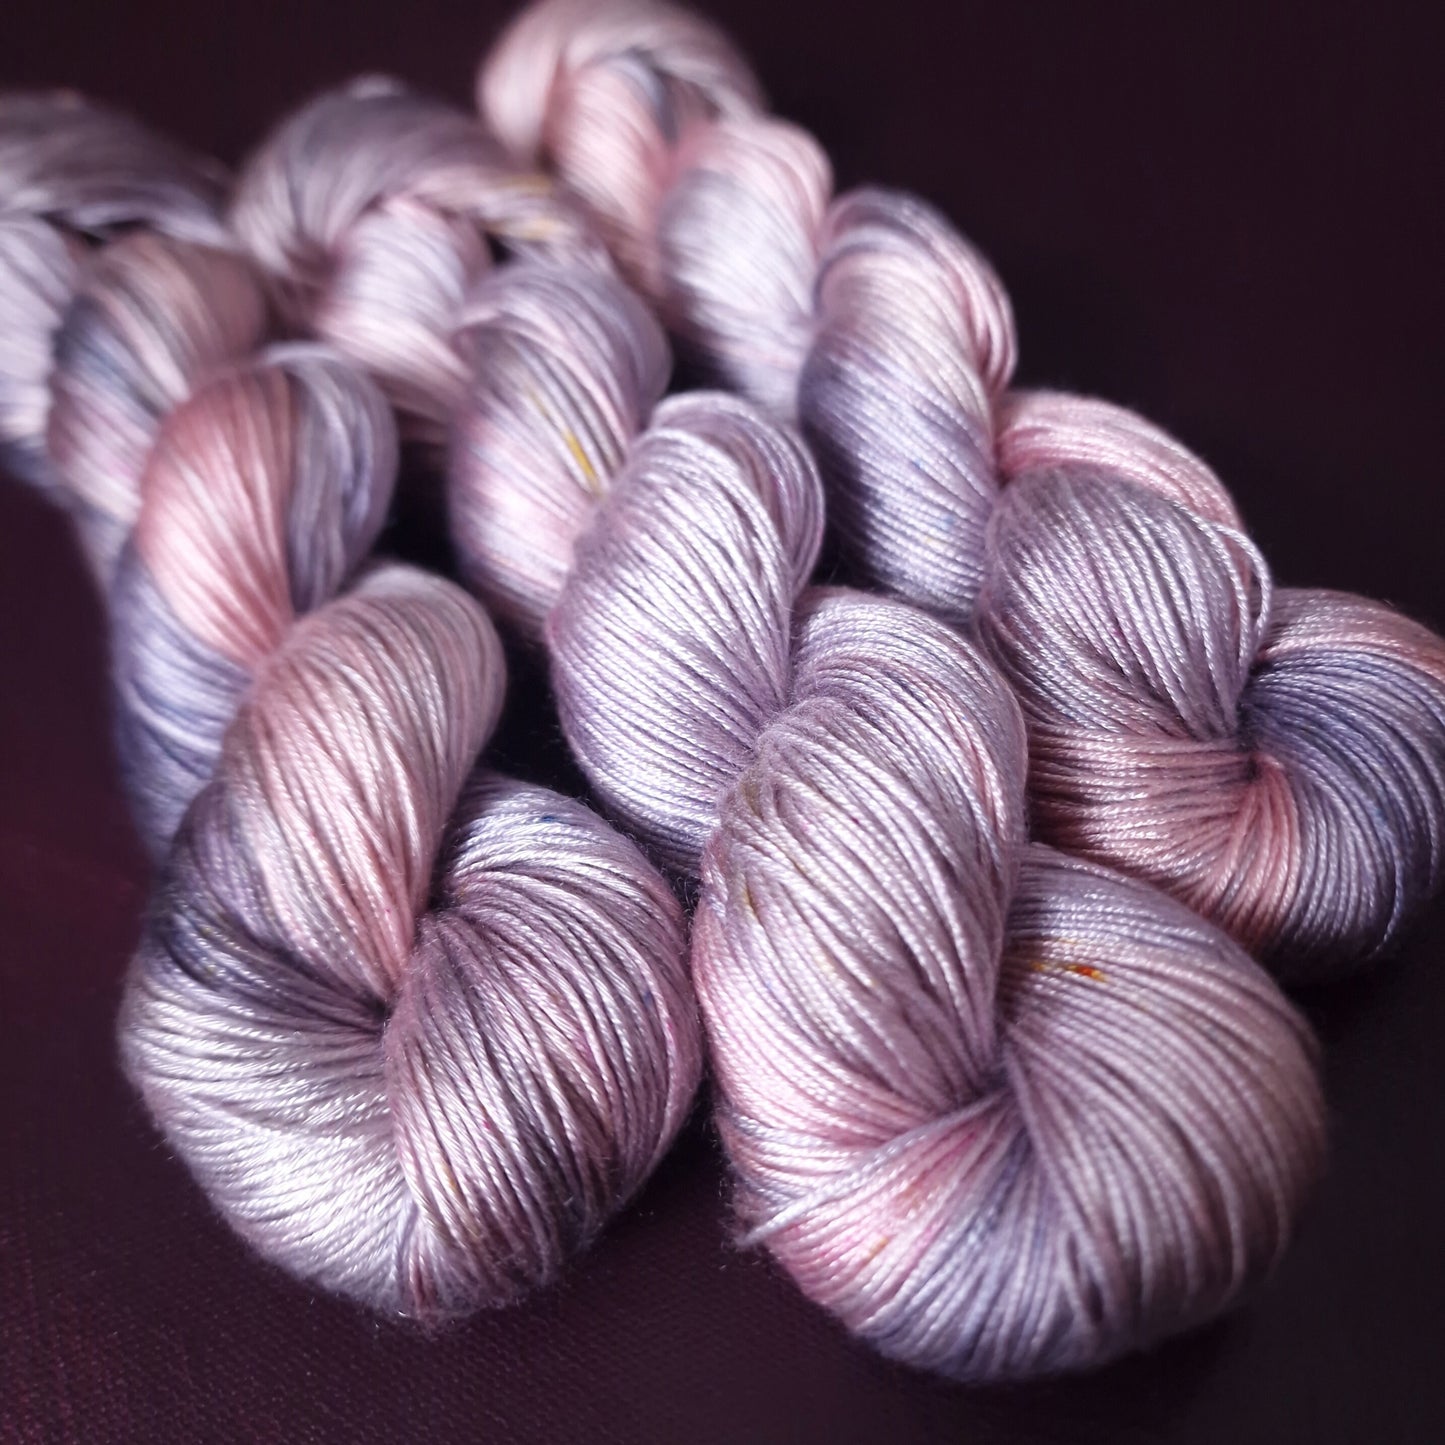 Hand dyed yarn ~ Unicorn Fairy ***Dyed to order ~ fingering / DK weight tencel OR bamboo yarn, vegan, hand painted